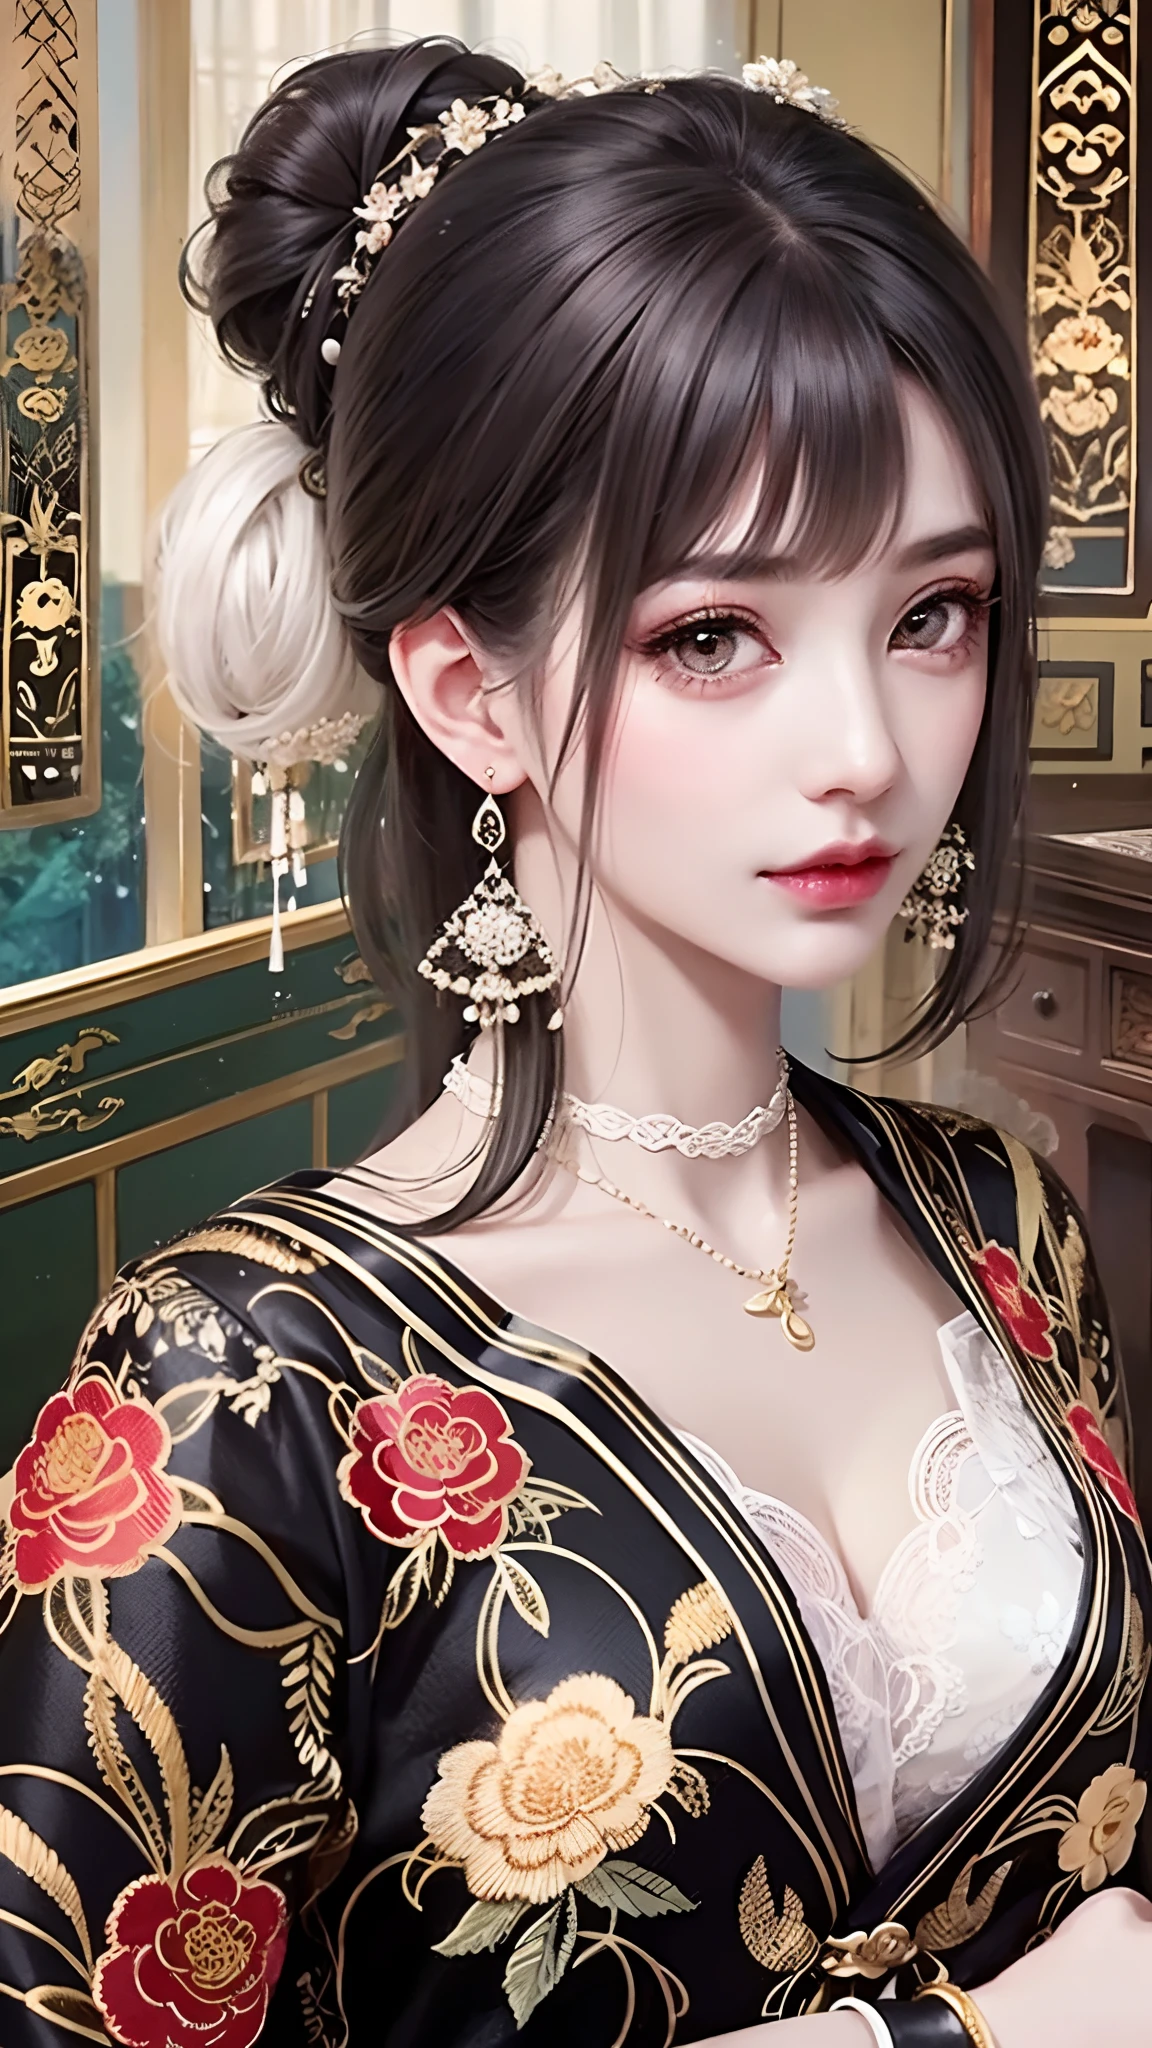 the detail,8K resolution,Ultra-high resolution,A young Miao girl, a cute girl，short detailed hair，hair-bun，lipsticks，Tassel earrings，choker necklace，Black clear eyes，Smooth hair,clavicle,Delicate and perfect facial features, the most beautiful big eyes,Long eyelashes,The eyes are sweet and there are lying silkworms，dynamic angle,extreme picture quality,Highest precision,Precise and perfect human anatomy，(((Slim black antique Han clothes，Red embroidery)))，((sitted))，Warm scene，Ultra-high resolution，Ultra-clear Chinese antique style black flowing hair with a delicate bun）By bangs，（Long flowing hair，With a bun:1.3）），Delicate collarbones，beautiful make up，Exquisite and perfect facial features，，Big watery eyes，Lying silkworm，Long eyelashes，The eyes are sweet and have eye shadow，Slim waist，Do not show your hands，，lipsticks，Blushlush，Delicate earring earrings，